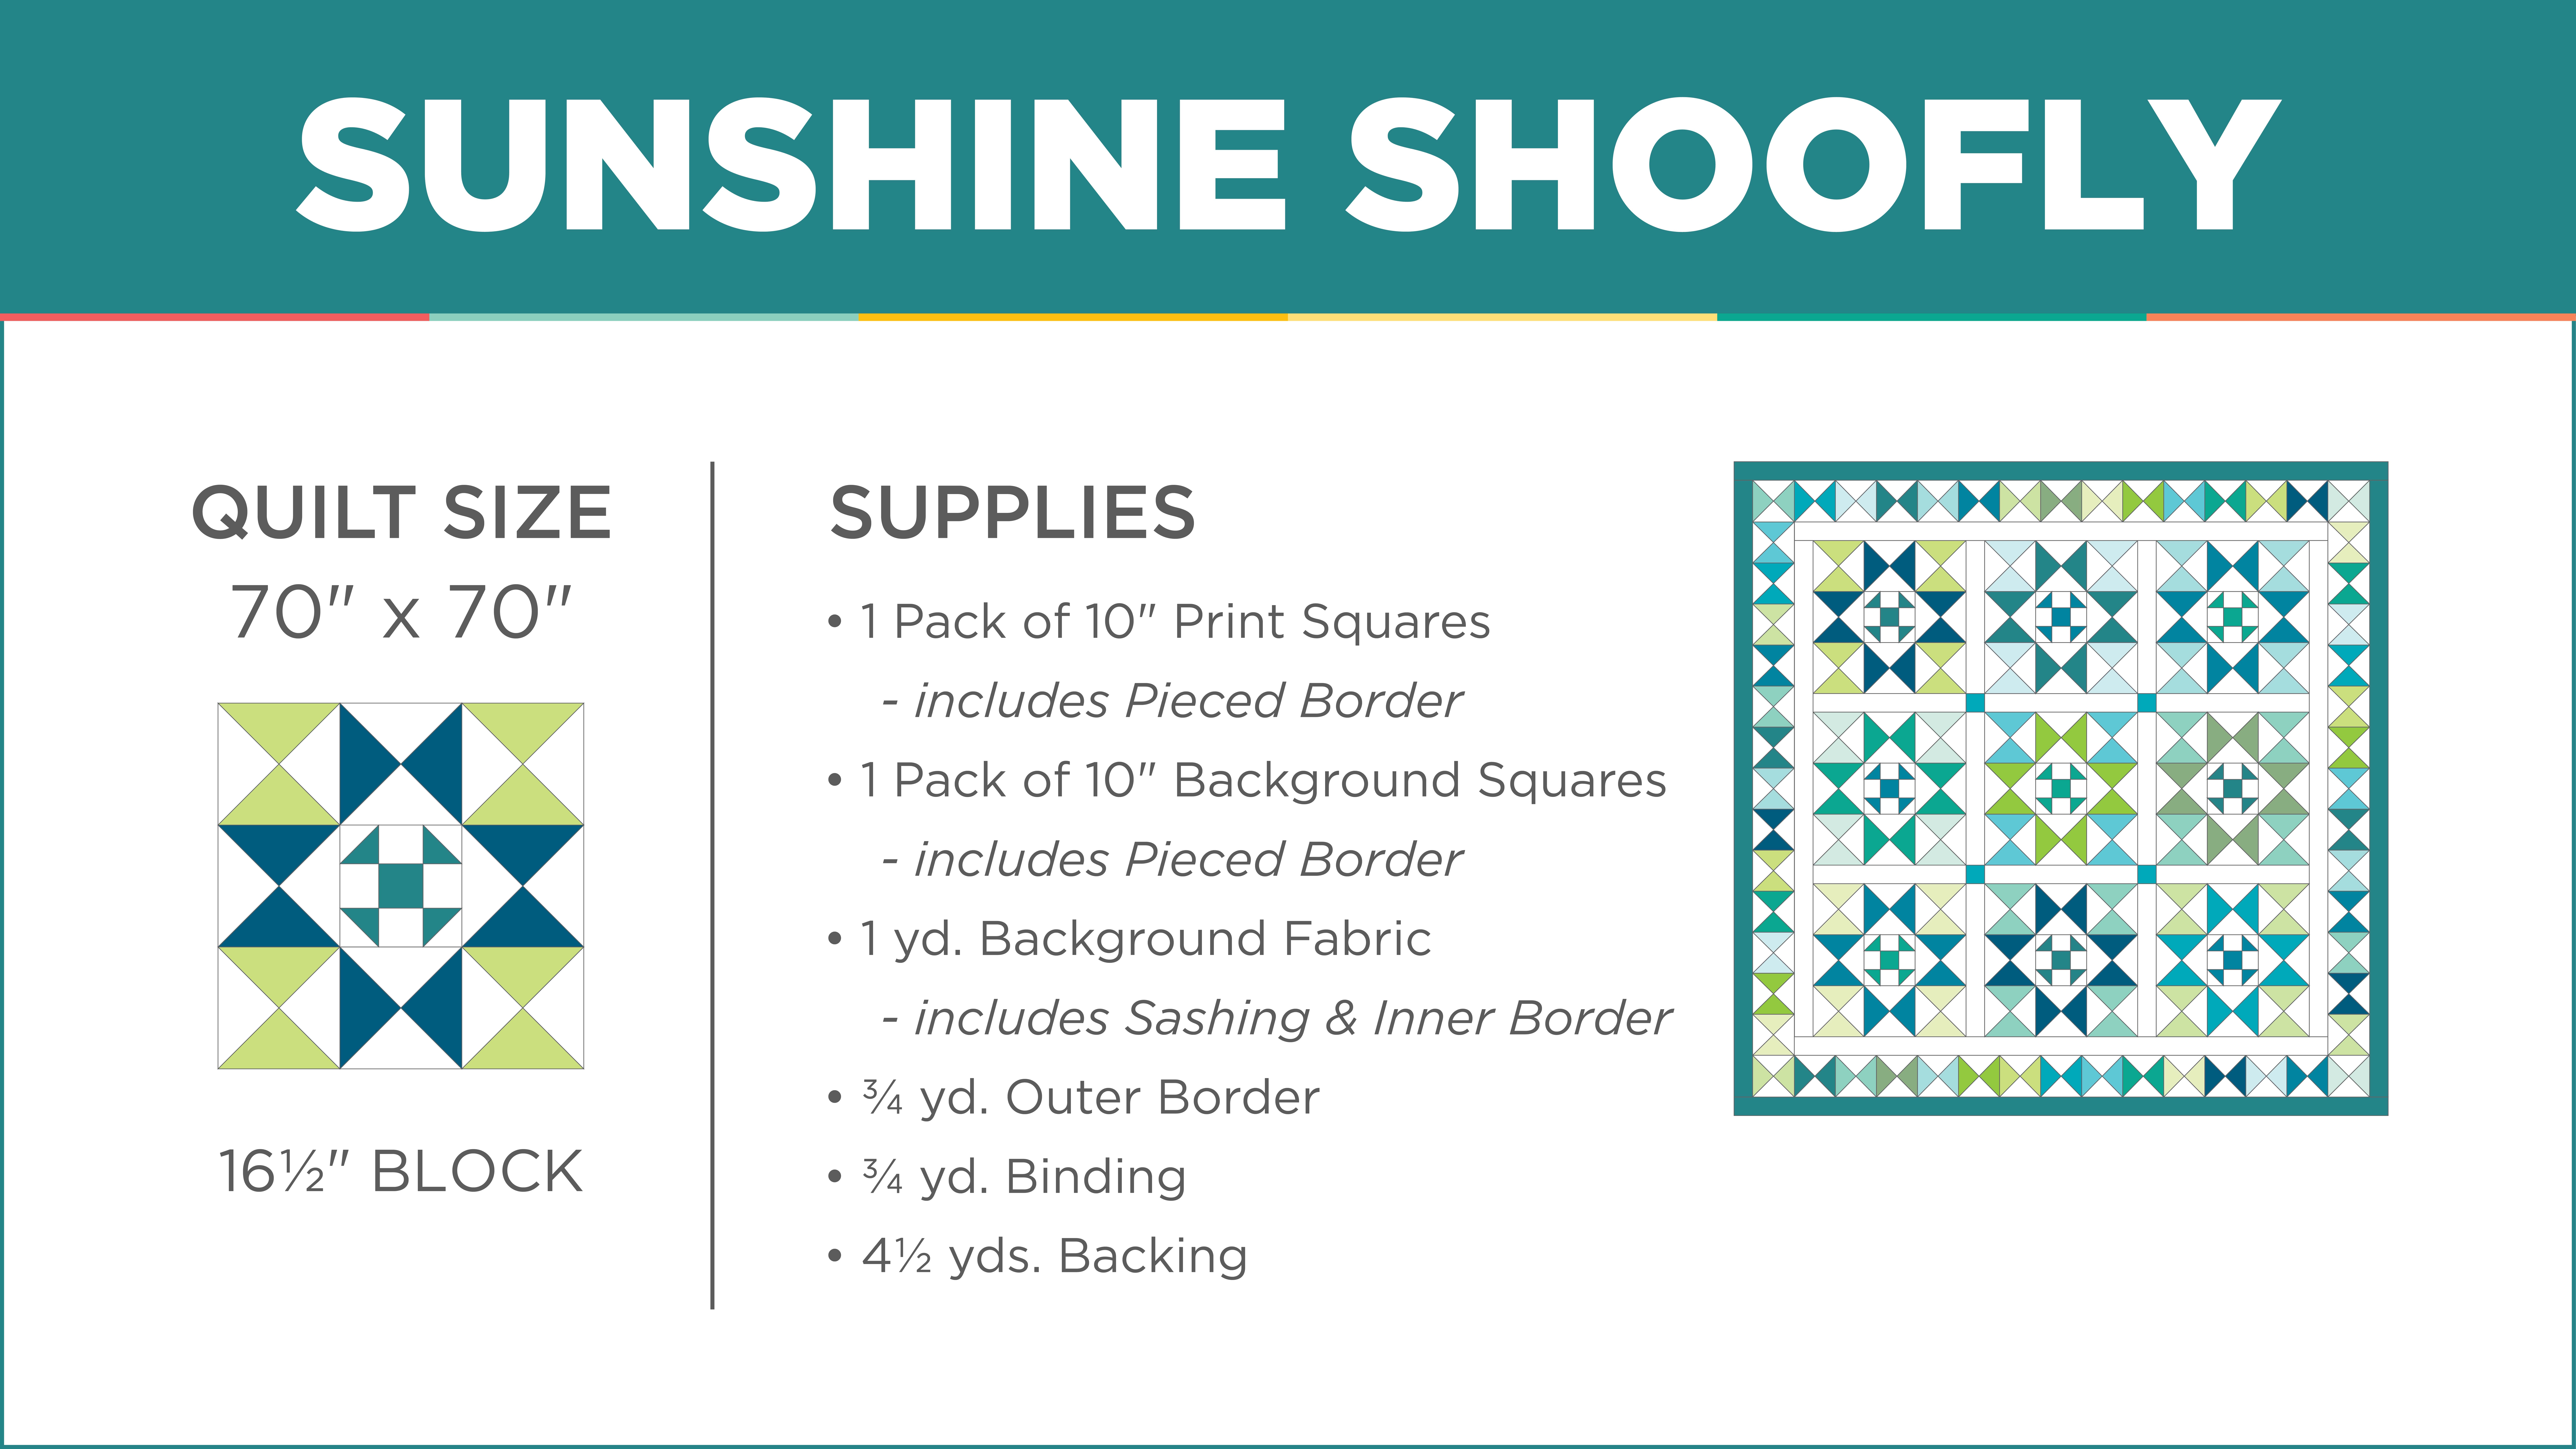 The Sunshine Shoofly quilt from Missouri Star Quilt Co.